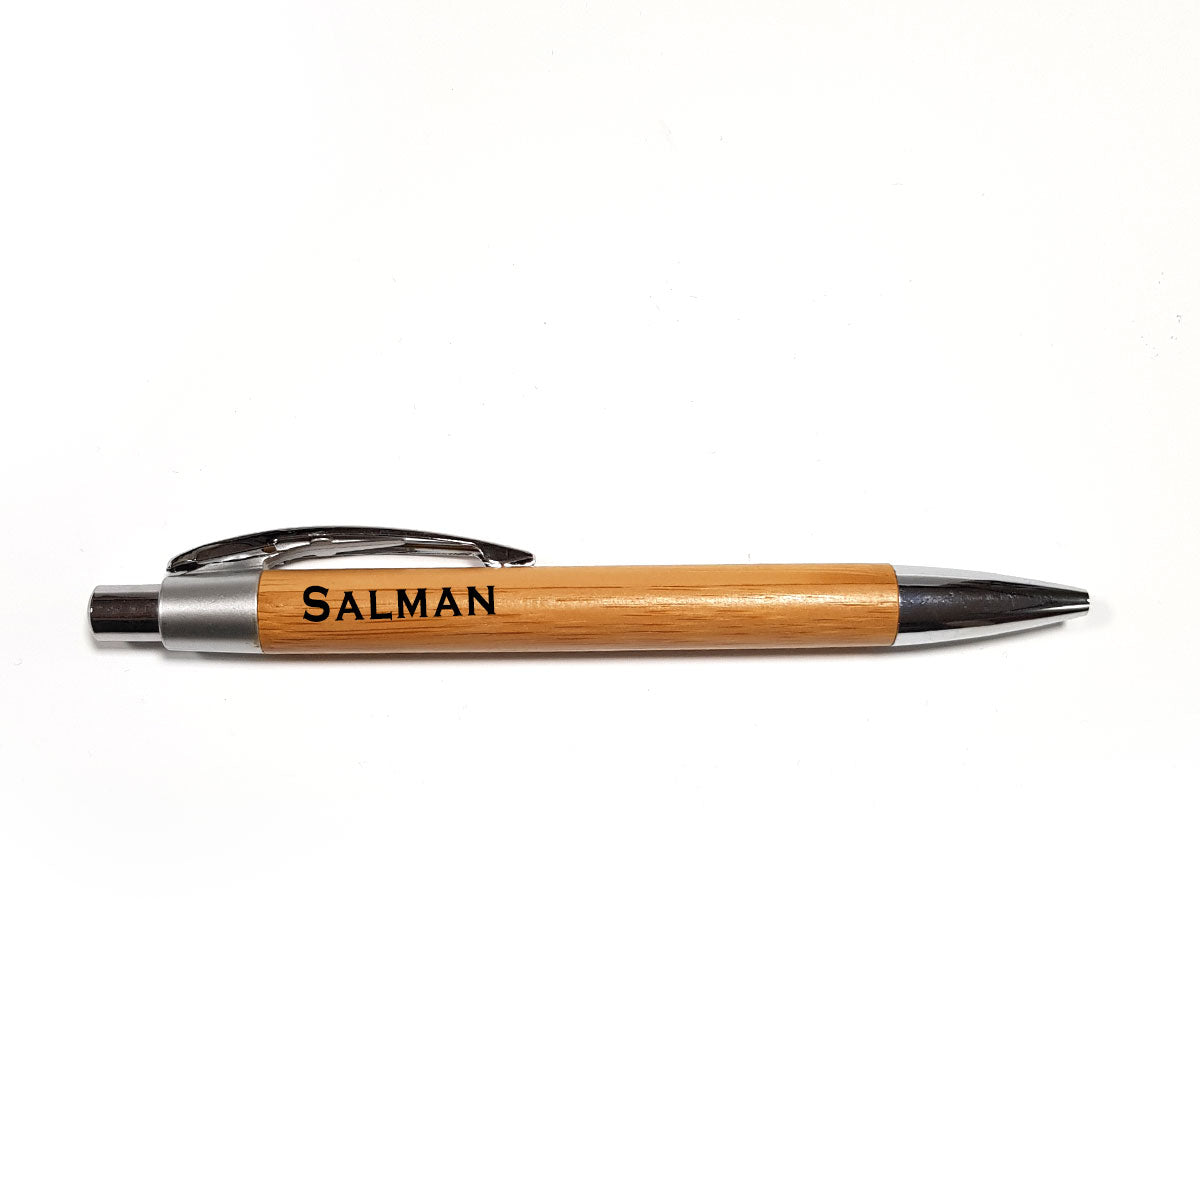 Wooden pen - add your name